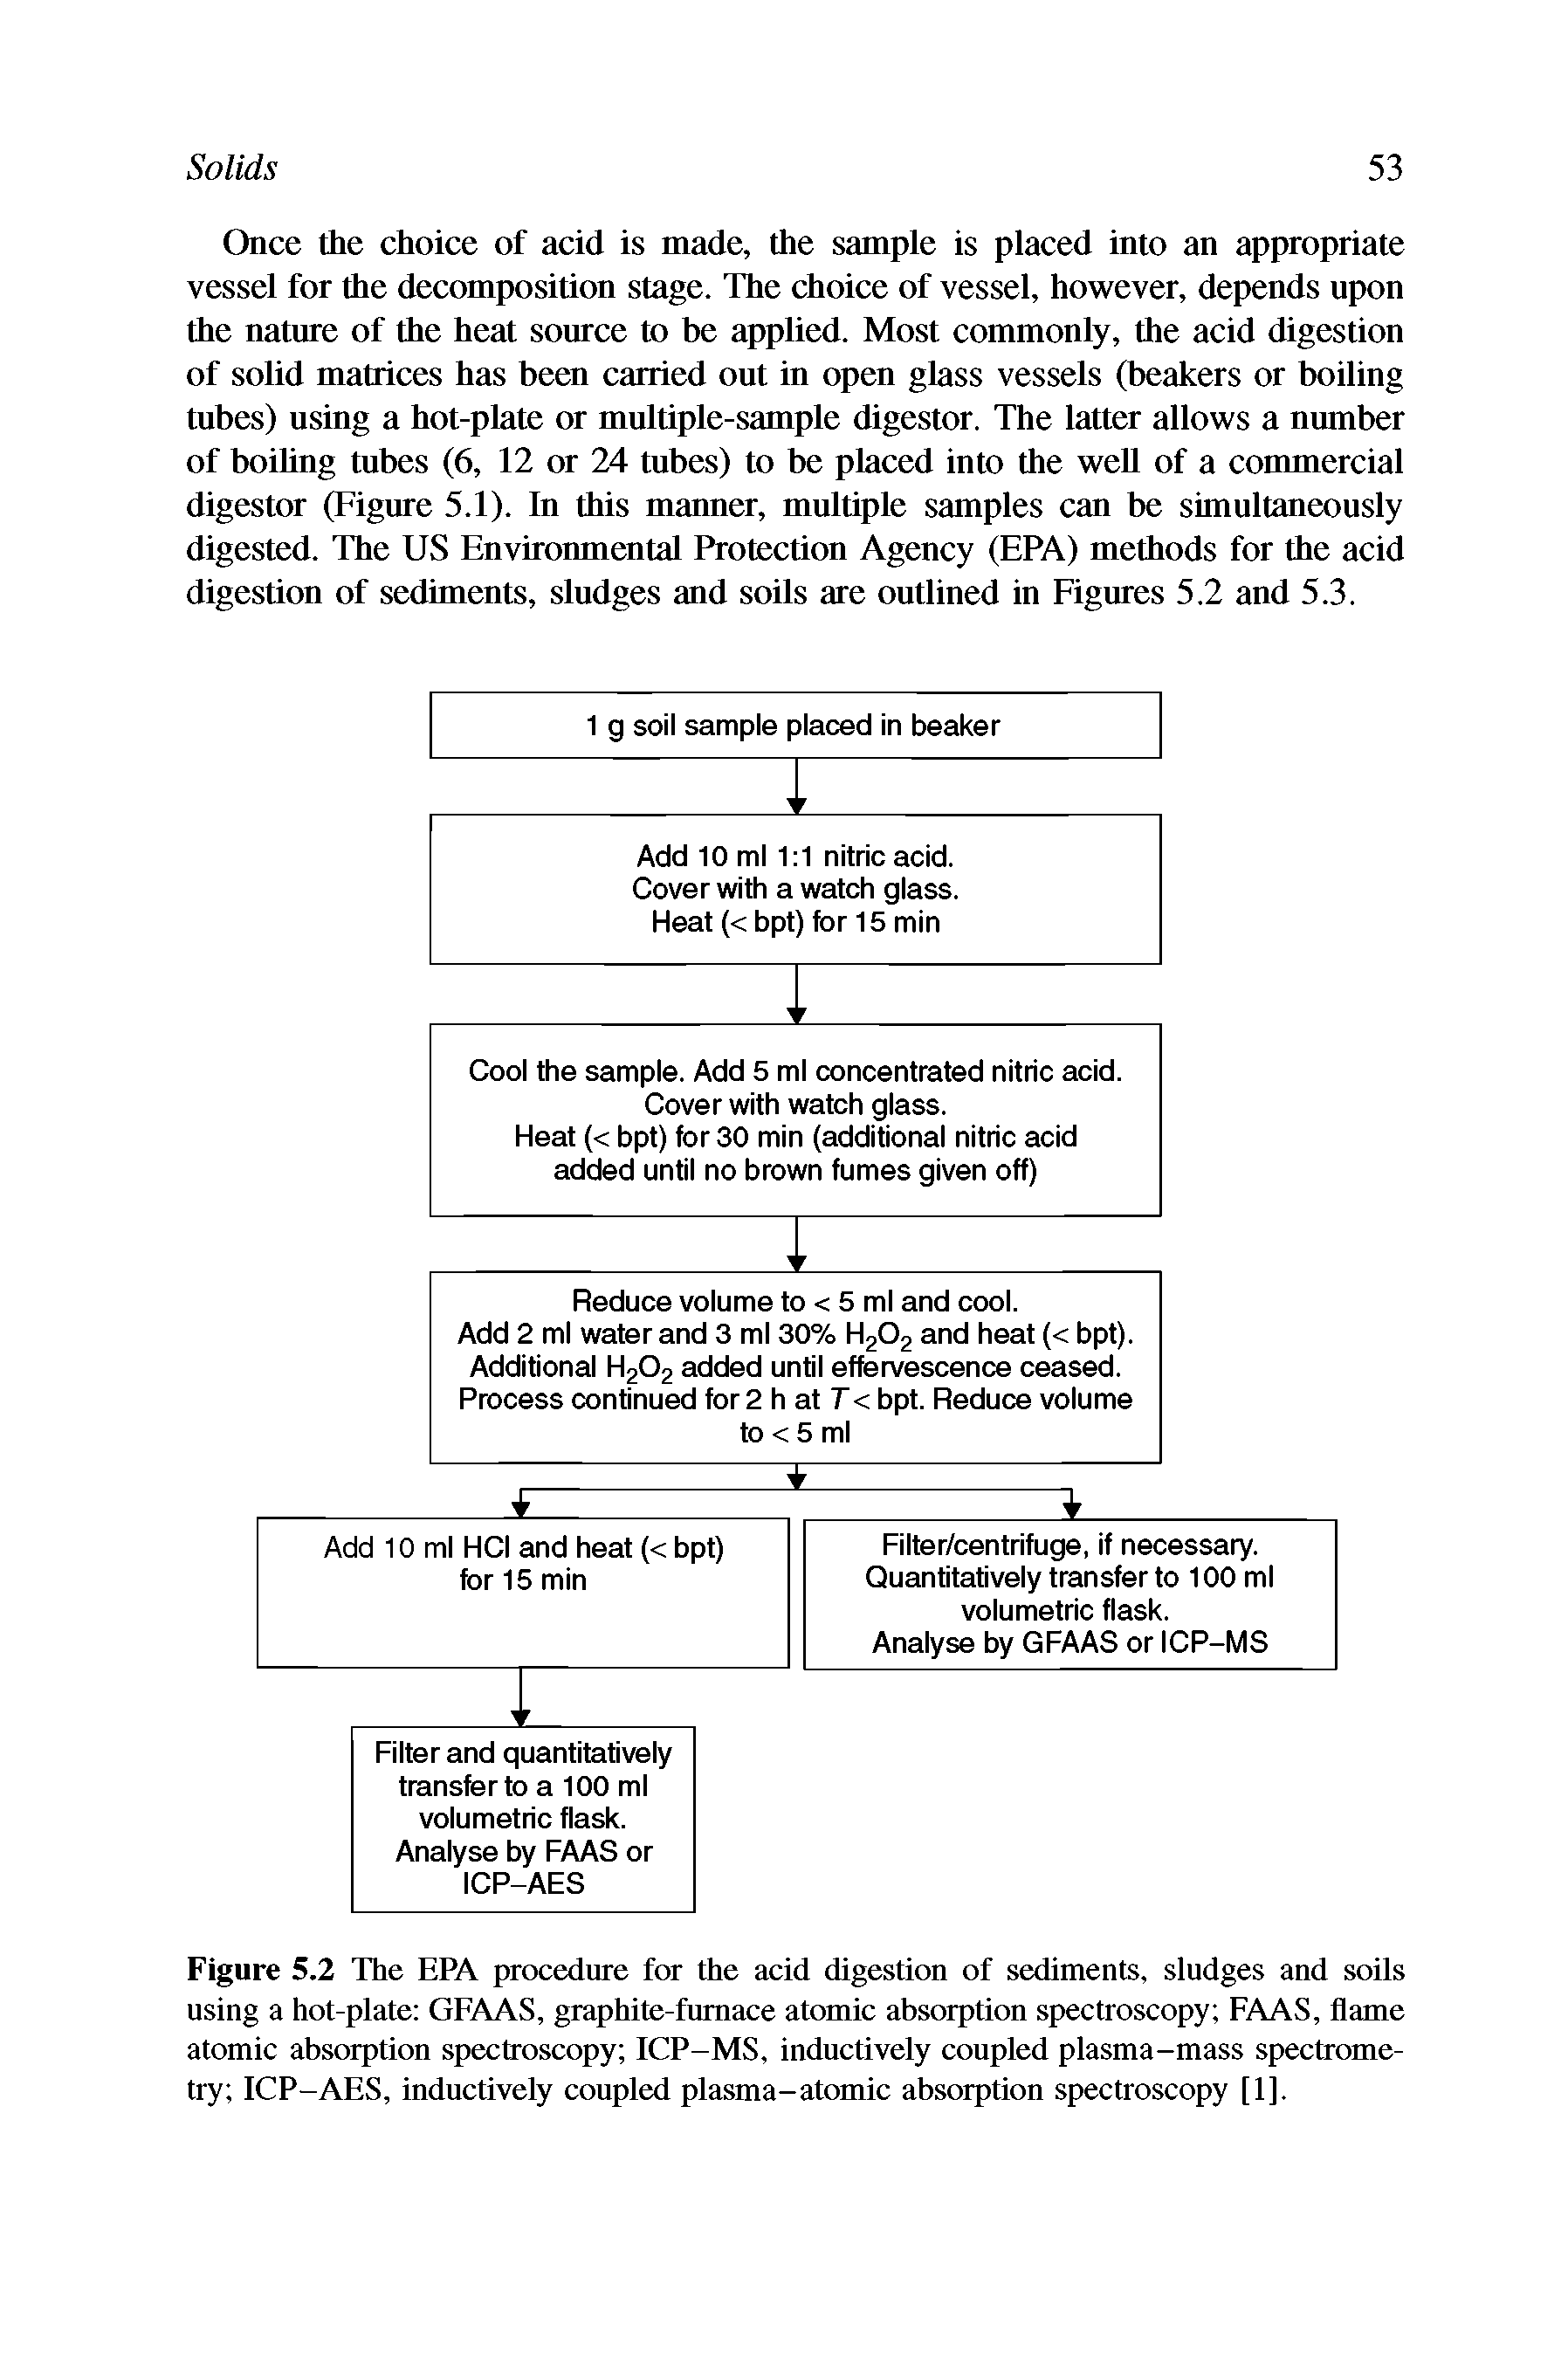 Figure 5.2 The EPA procedure for the acid digestion of sediments, sludges and soils using a hot-plate GFAAS, graphite-furnace atomic absorption spectroscopy FAAS, flame atomic absorption spectroscopy ICP-MS, inductively coupled plasma-mass spectrometry ICP-AES, inductively coupled plasma-atomic absorption spectroscopy [1],...